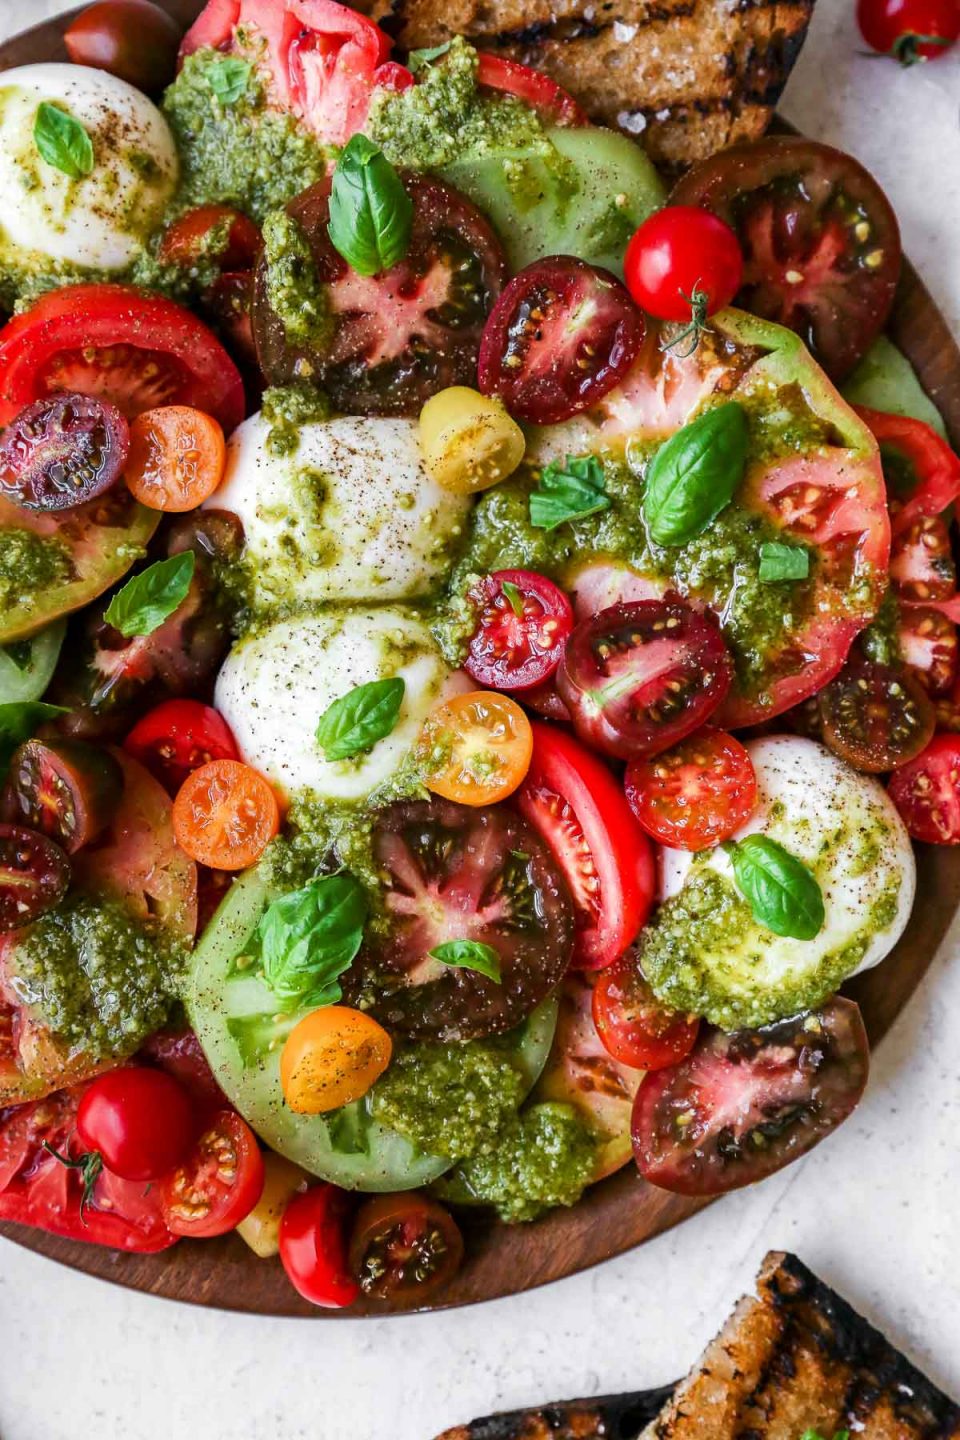 Heirloom tomato burrata salad arranged on a large wooden serving board, topped with vibrant green fresh pesto sauce. The board is surrounded by a few slices of grilled bread.